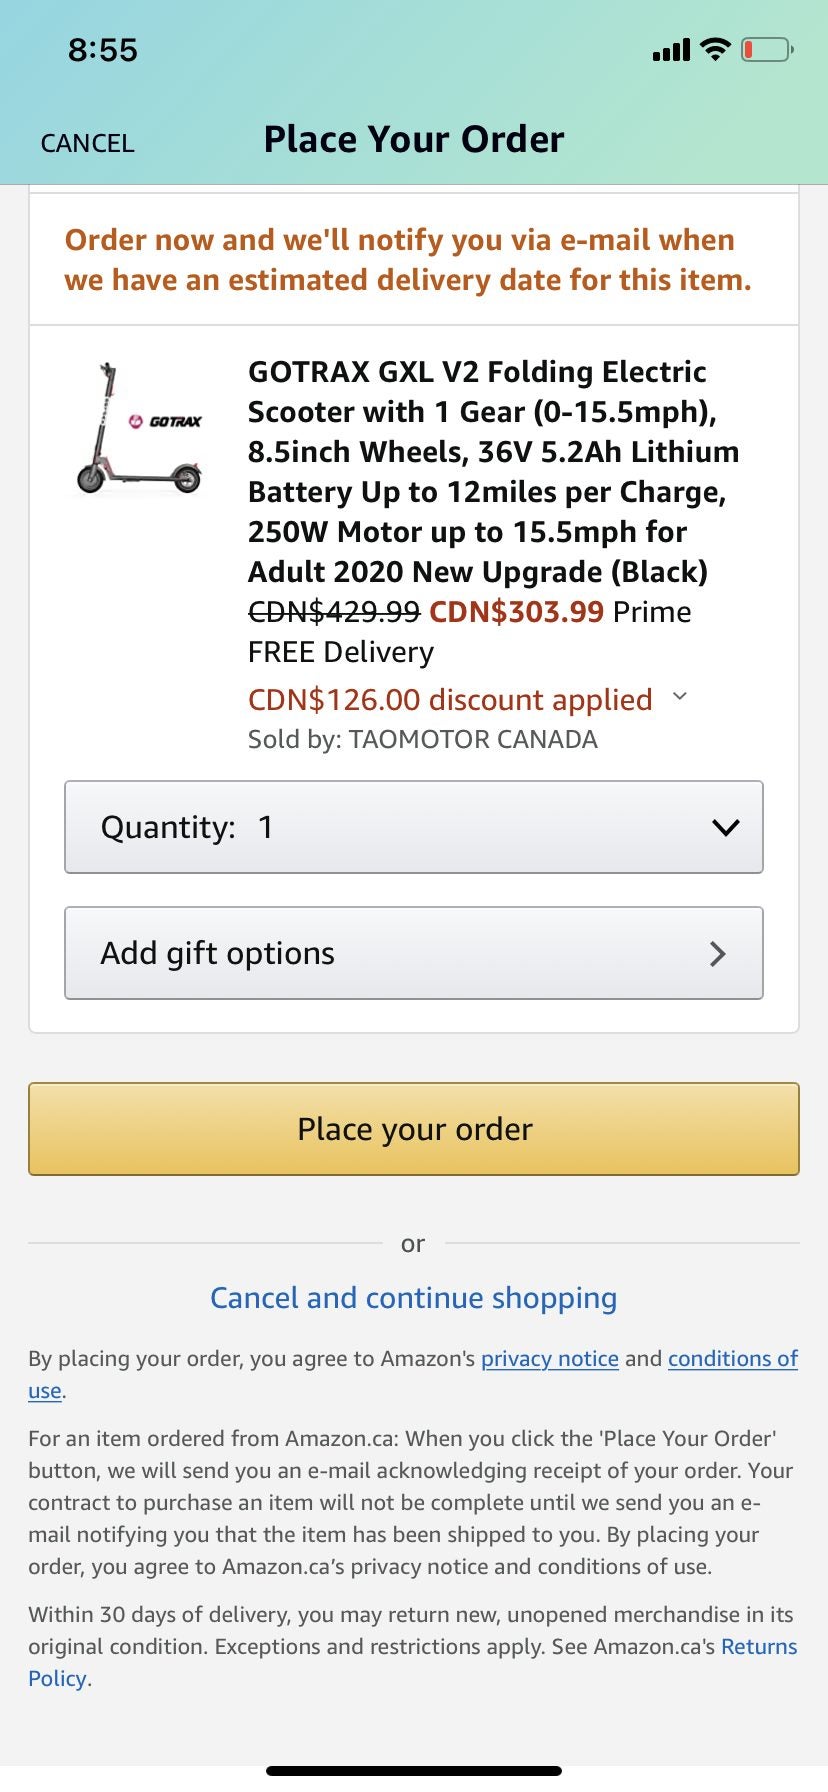 [Amazon.ca] GOTRAX GXL V2 Electric scooter (303.99 w/ coupon+code